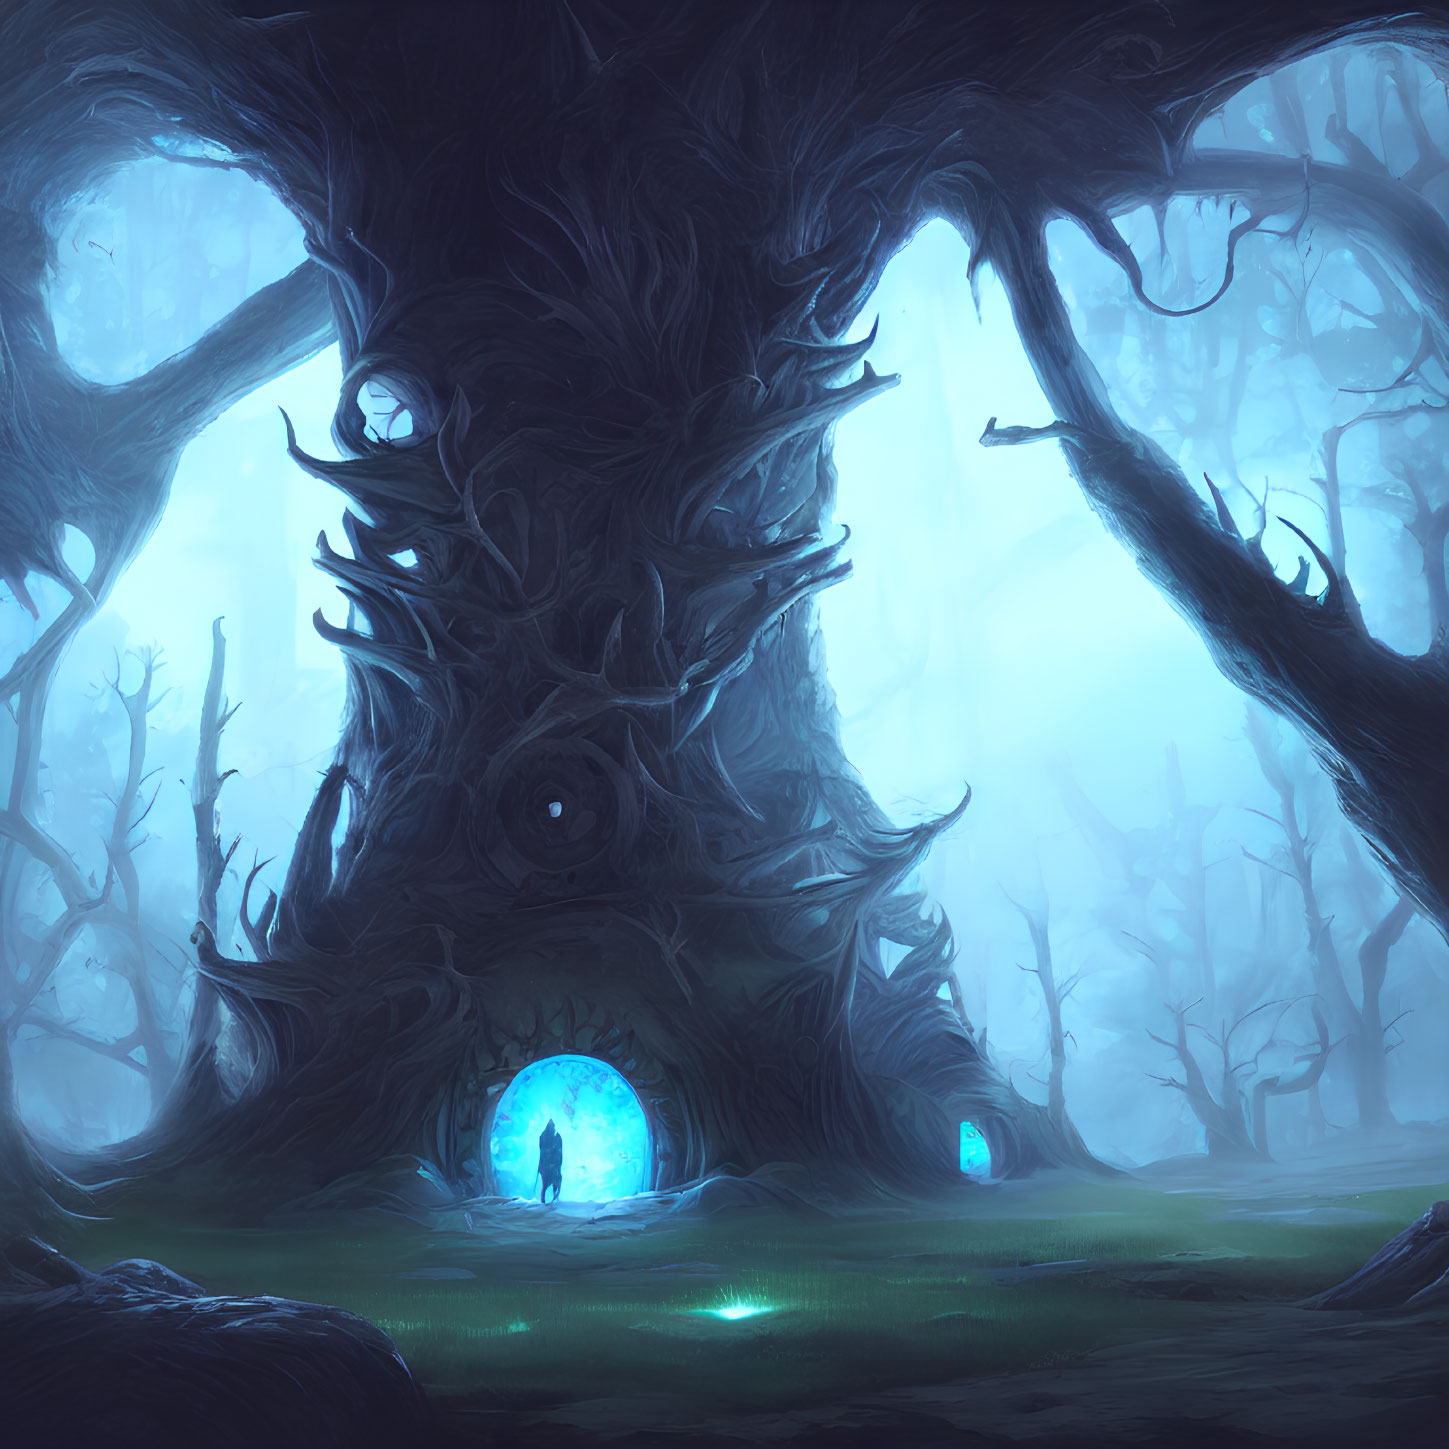 Enormous tree with eye and glowing portals in mystical forest